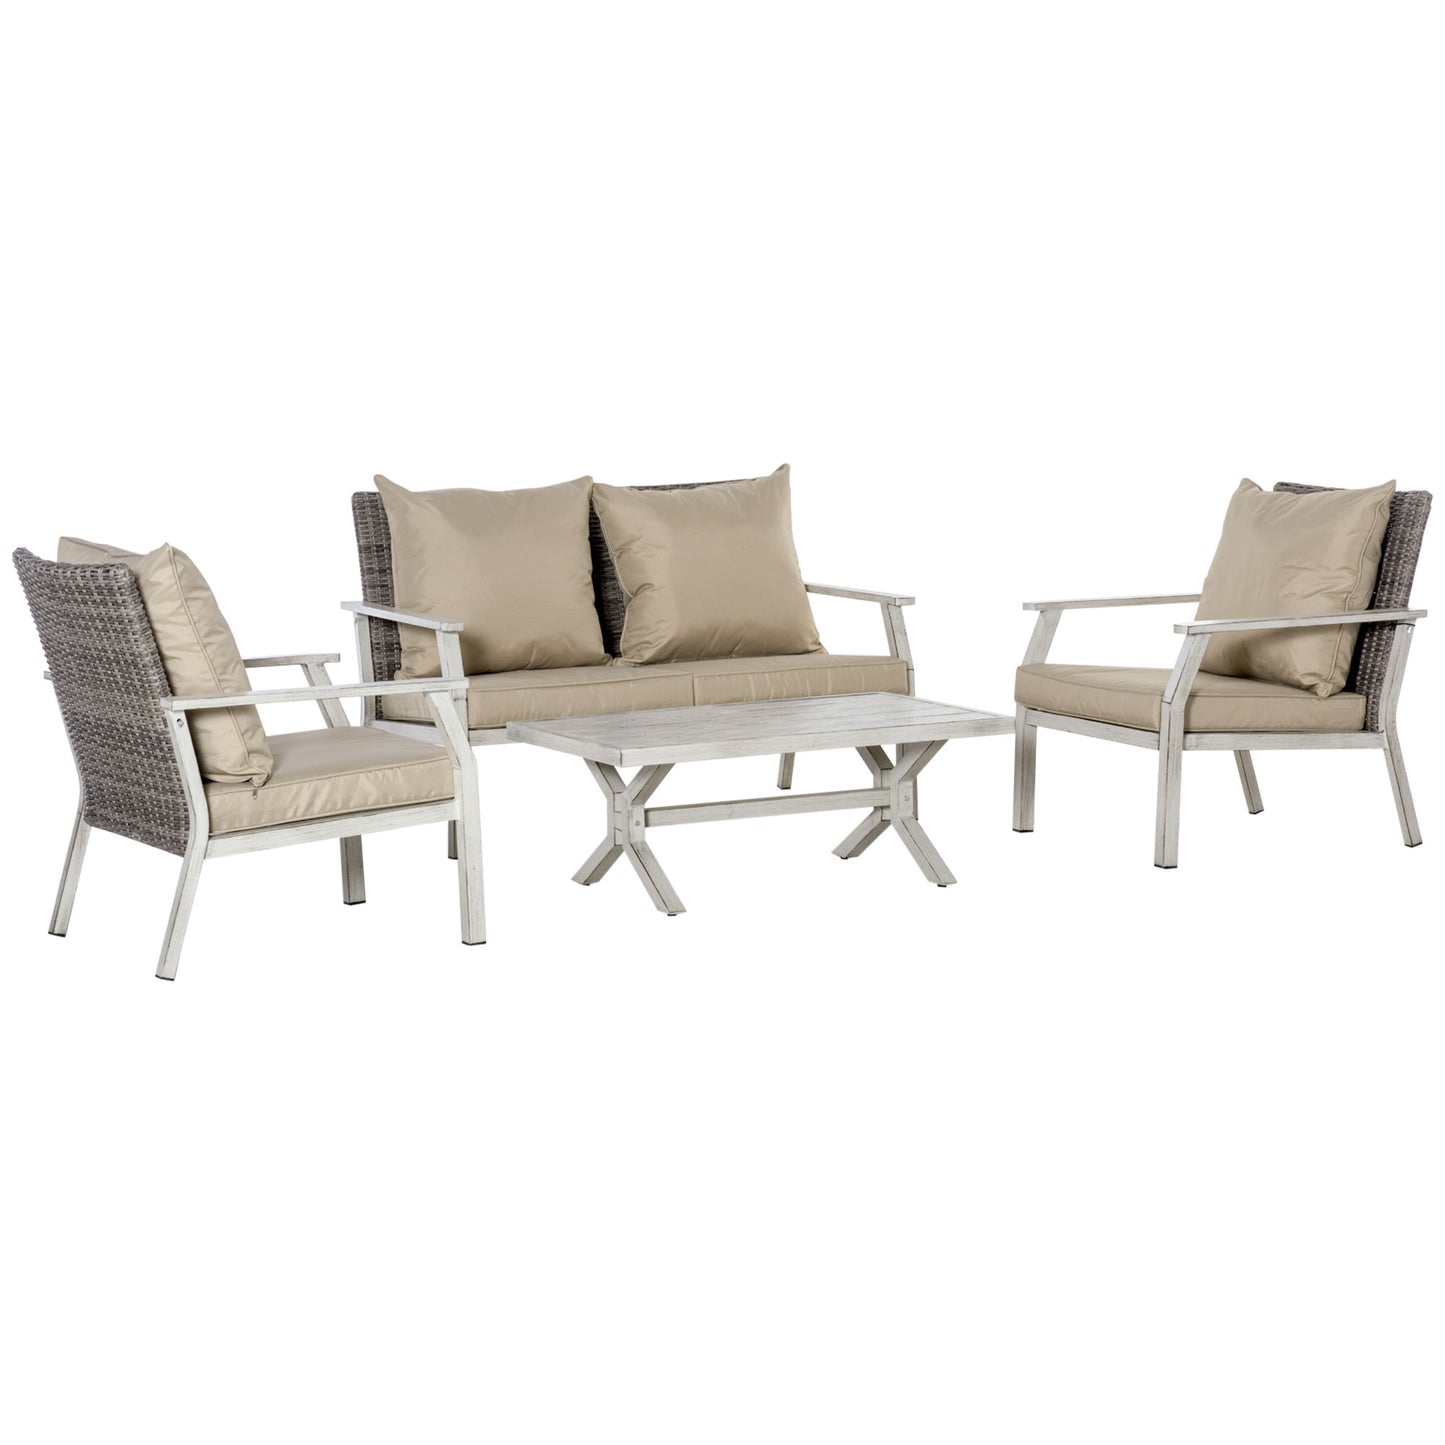 4 Pieces Patio Furniture Set with Cushions, Outdoor Wicker Conversation Sofa Sets, Aluminum Frame Sofa Sets for Backyard, Poolside, Garden, Beige Patio Furniture Sets Multi Colour  at Gallery Canada